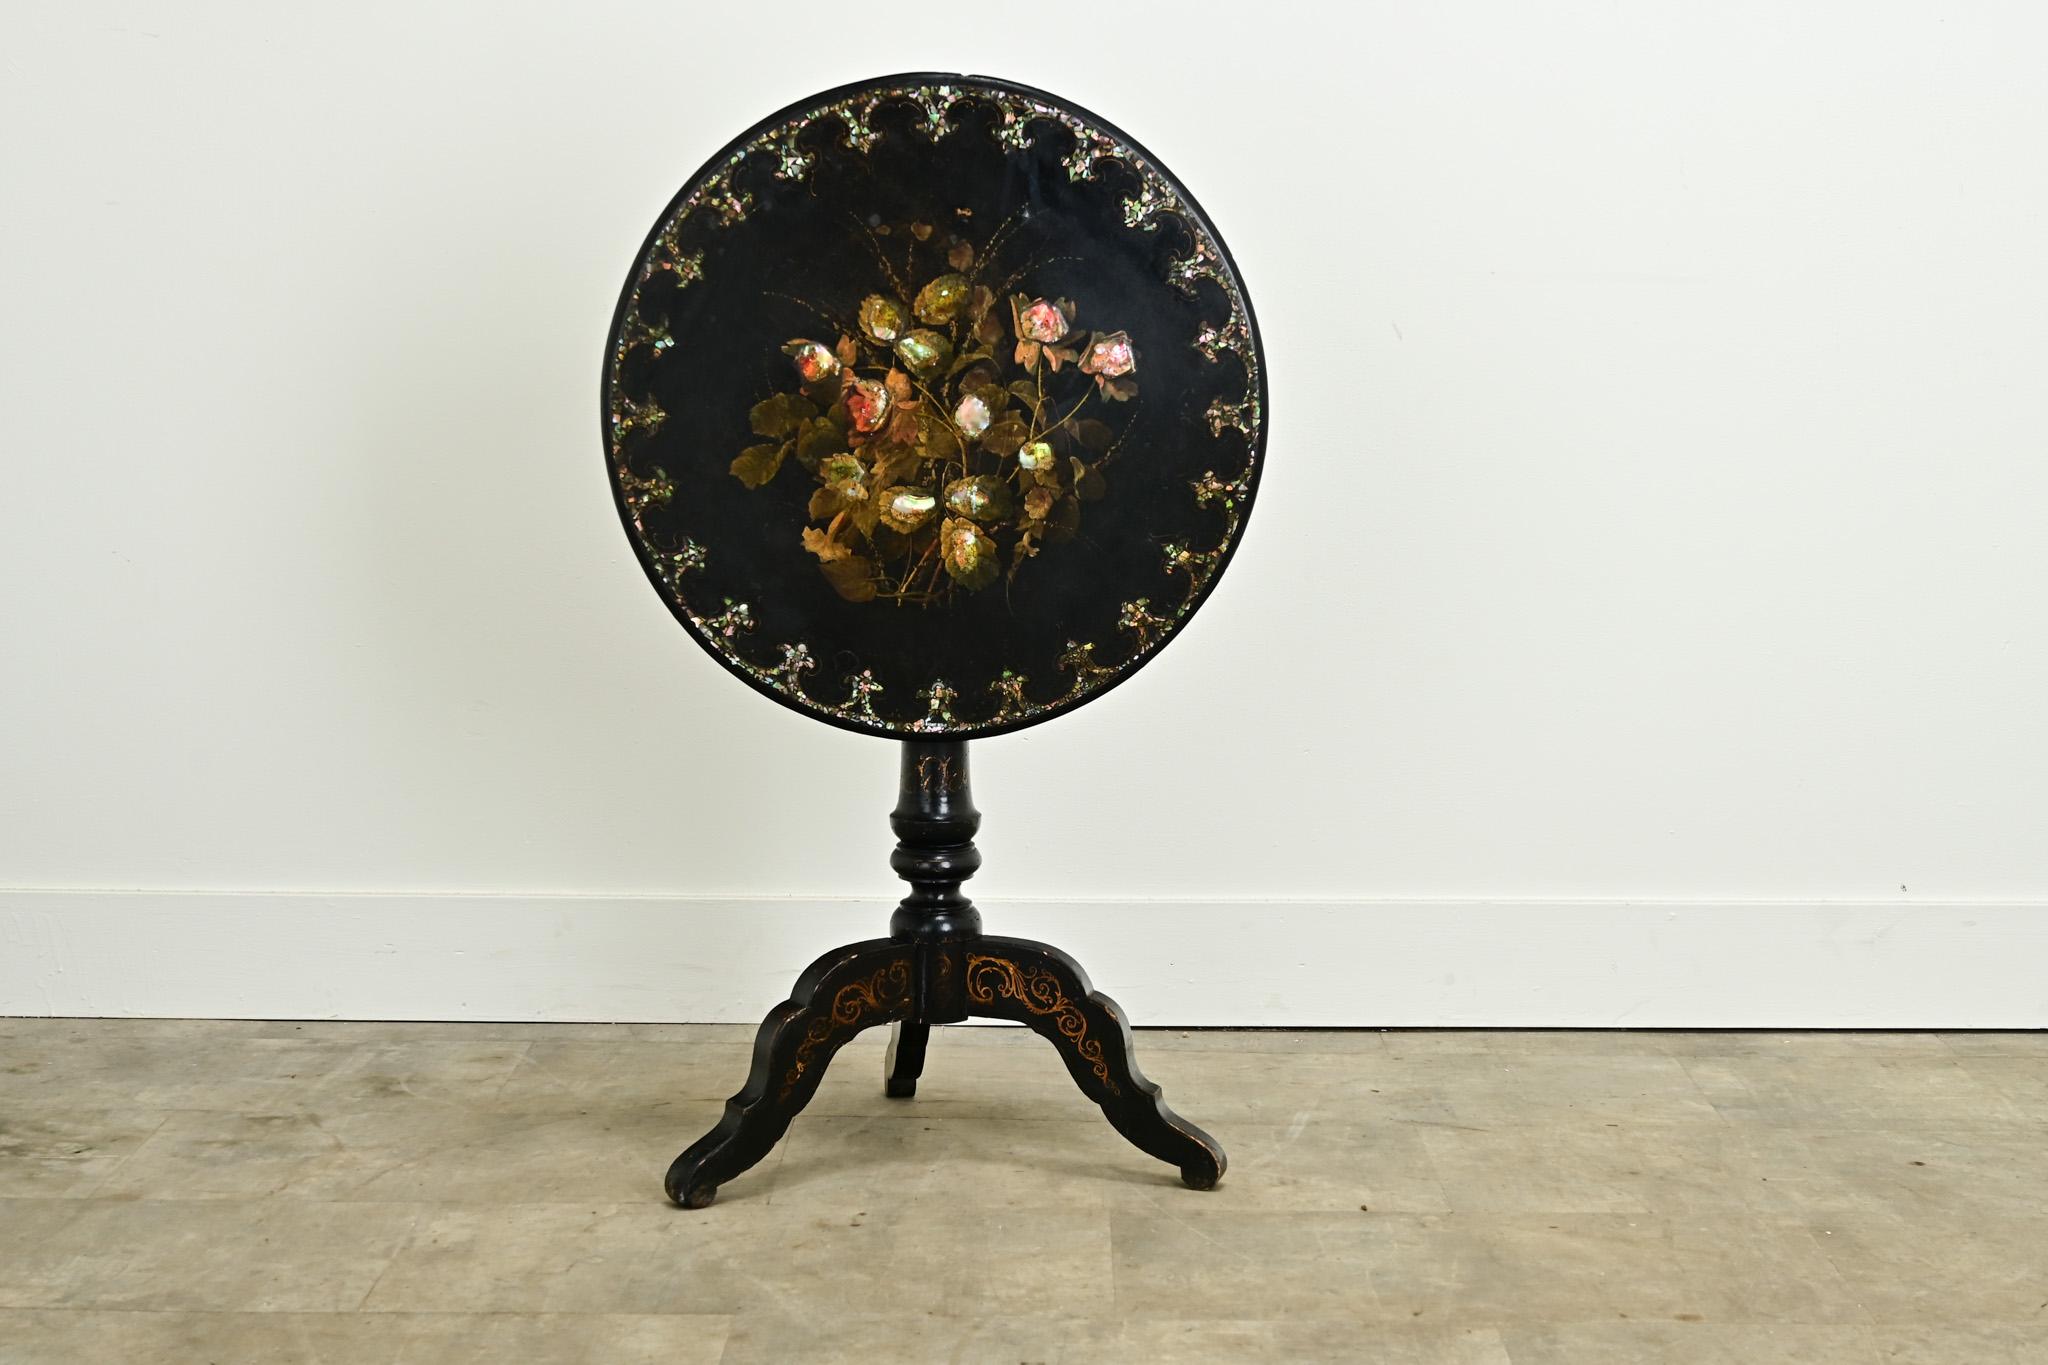 This impressive English ebonized and inlaid tilt top tea table will make a statement in any interior. This table is ebonized and has inlay of mother-of-pearl and paper mache painted flowers. The top sits on a splayed pedestal base with hand painted